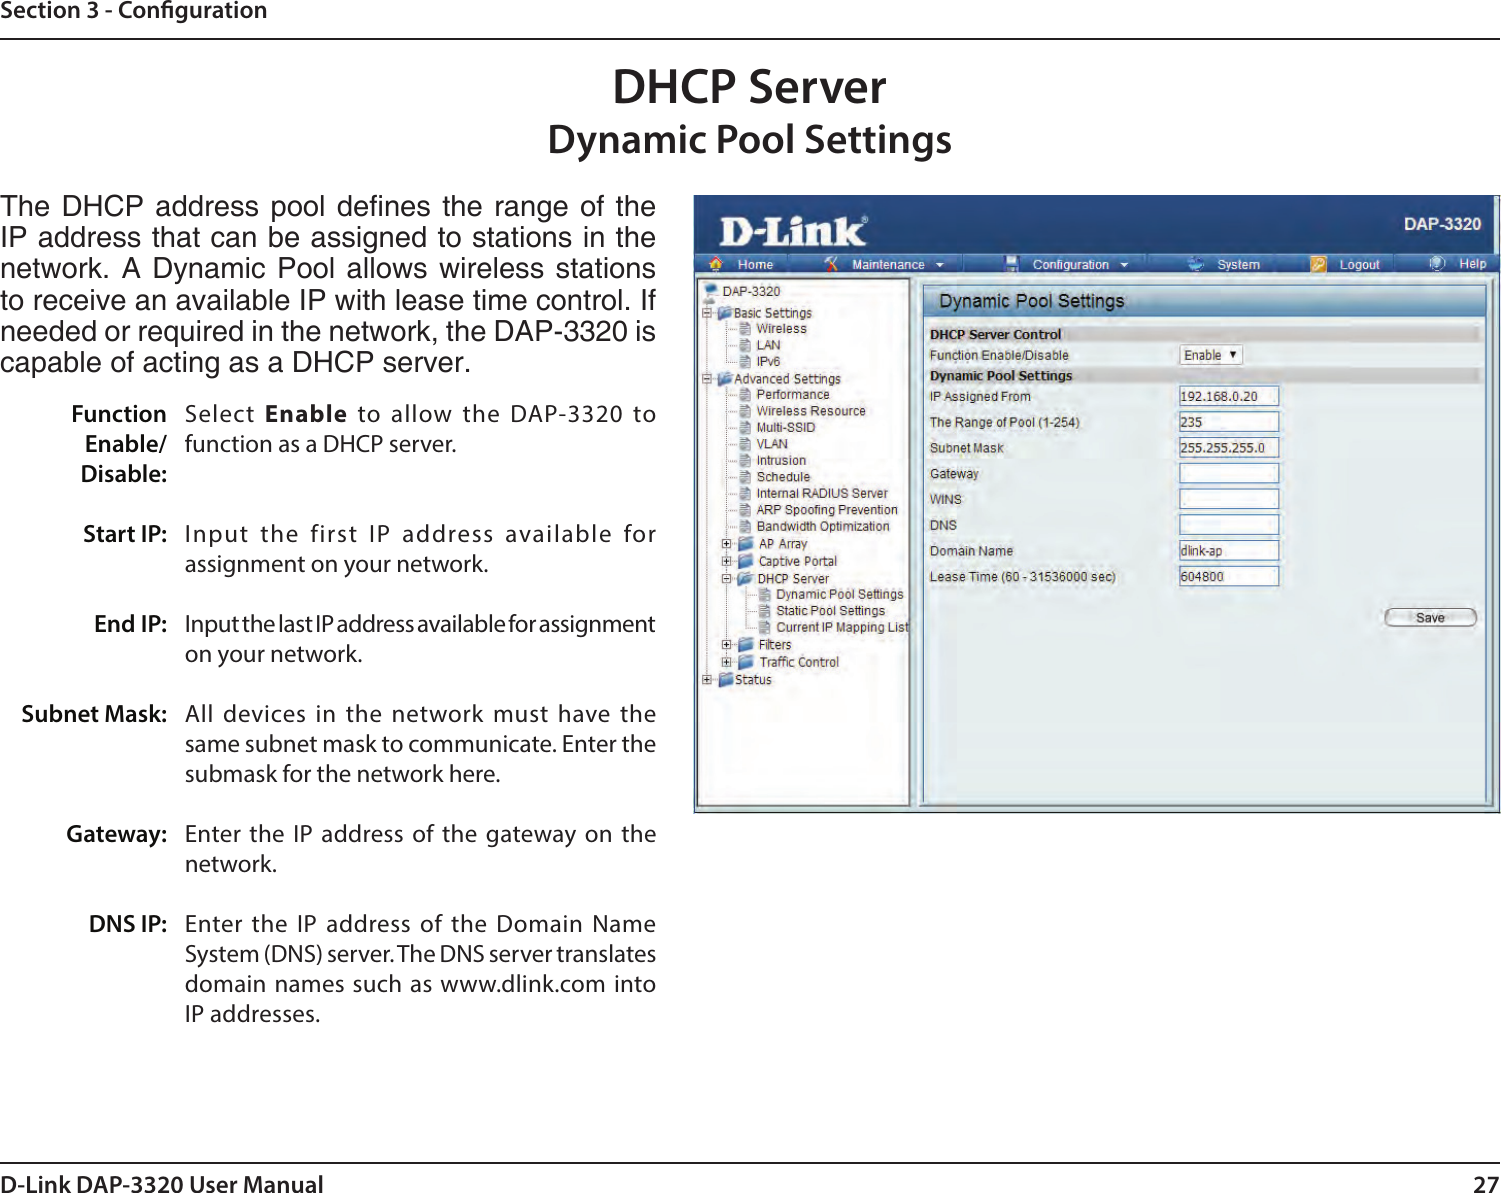 27D-Link DAP-3320 User ManualSection 3 - CongurationDHCP ServerDynamic Pool SettingsThe DHCP address  pool denes the  range of the IP address that can be assigned to stations in the network. A Dynamic Pool  allows wireless stations to receive an available IP with lease time control. If needed or required in the network, the DAP-3320 is capable of acting as a DHCP server.Select  Enable to allow the DAP-3320 to function as a DHCP server.Input the first IP address available for assignment on your network.Input the last IP address available for assignment on your network.All devices in the network must have the same subnet mask to communicate. Enter the submask for the network here.Enter the IP address of the gateway on the network.Enter the IP address of the Domain Name System (DNS) server. The DNS server translates domain names such as www.dlink.com into IP addresses.Function Enable/Disable:Start IP:End IP:Subnet Mask:Gateway:DNS IP: